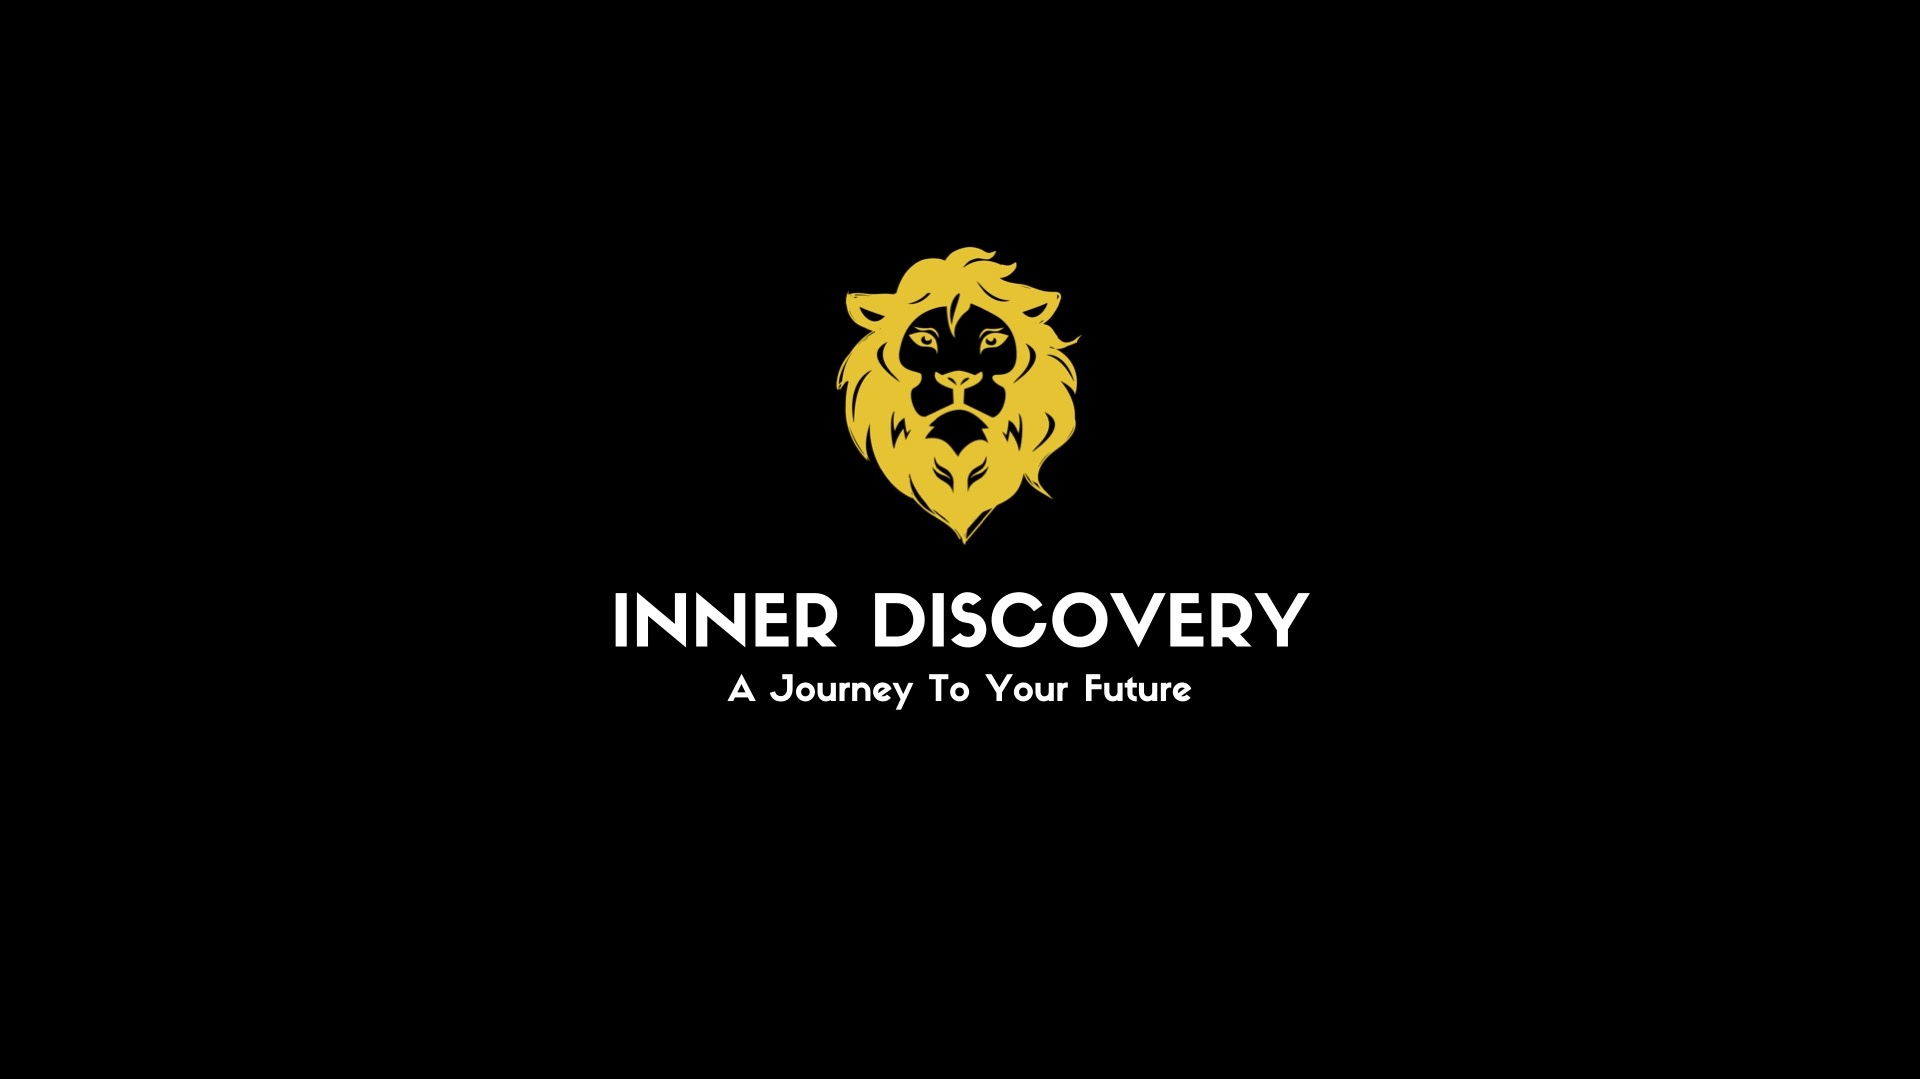 Inner discovery